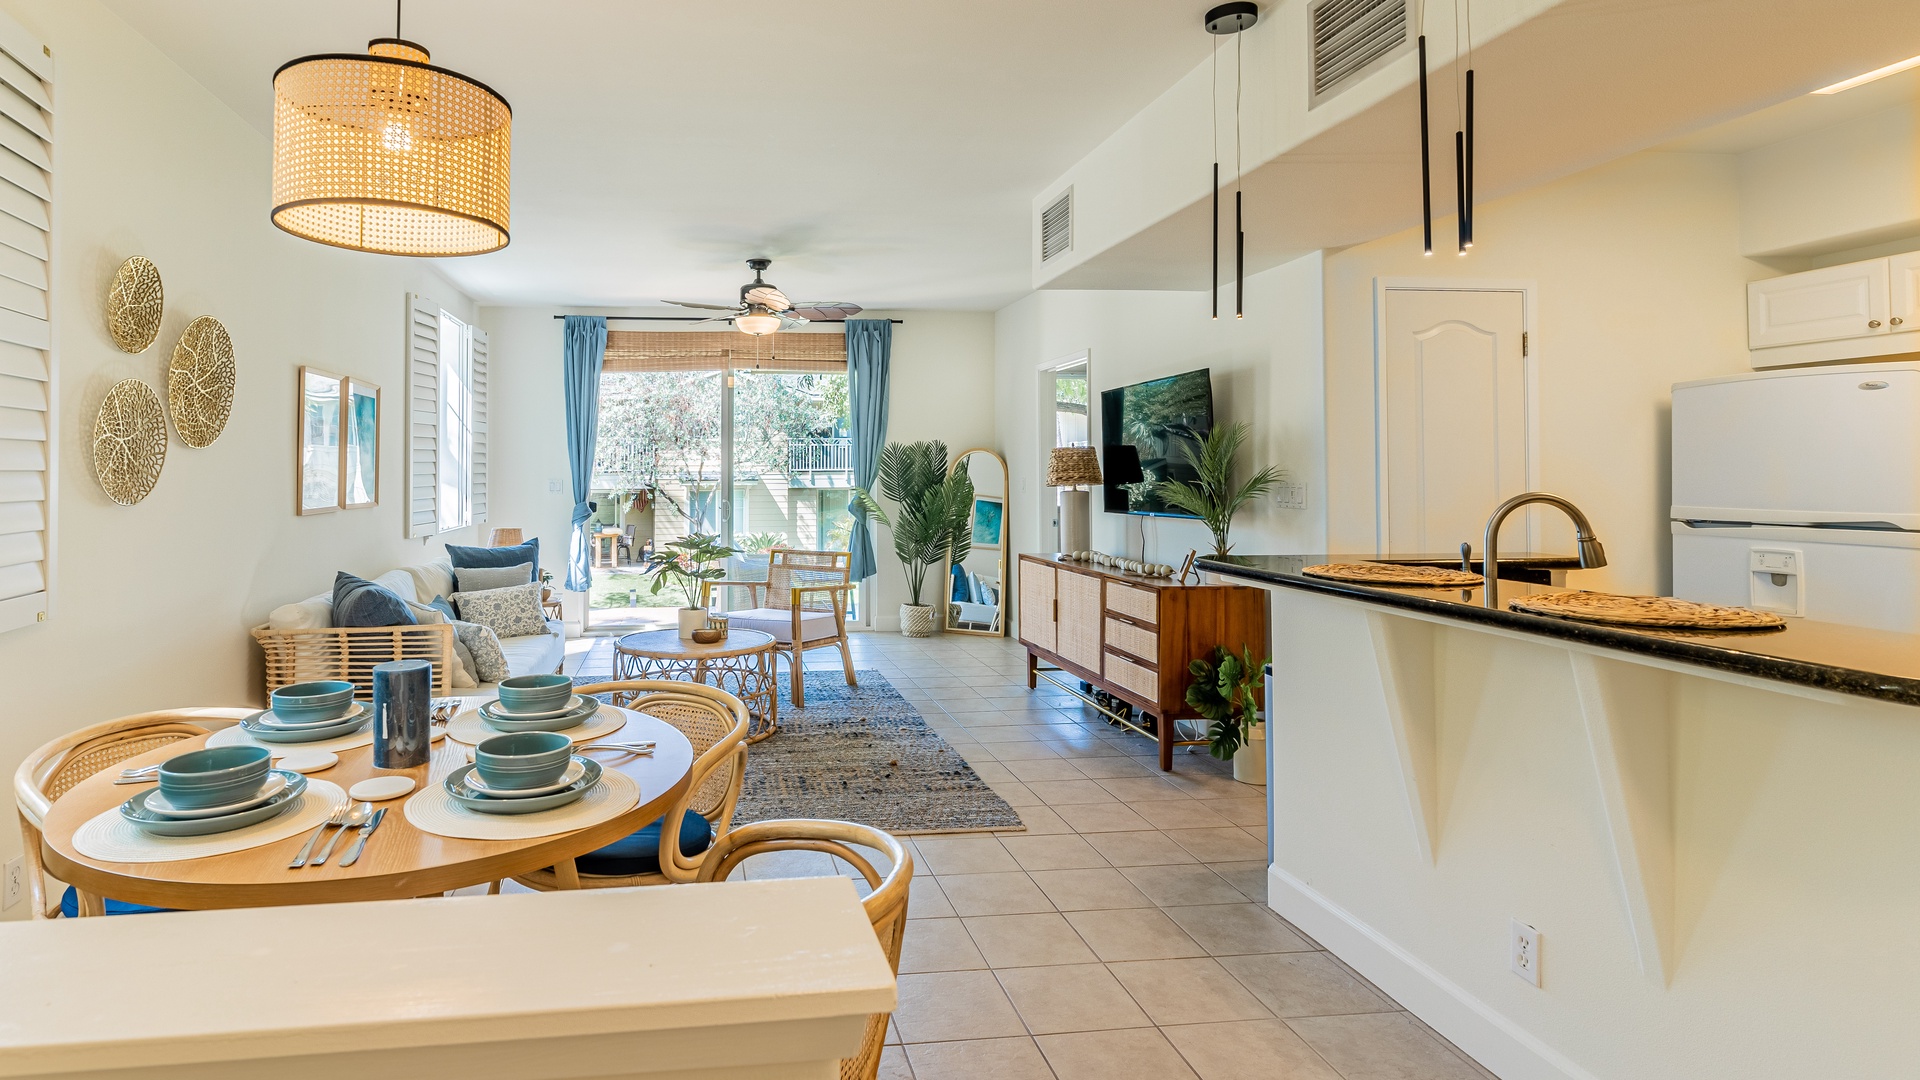 Kapolei Vacation Rentals, Ko Olina Kai 1033A - Seamless living with an open floor plan for cooking, dining and movie night on TV.